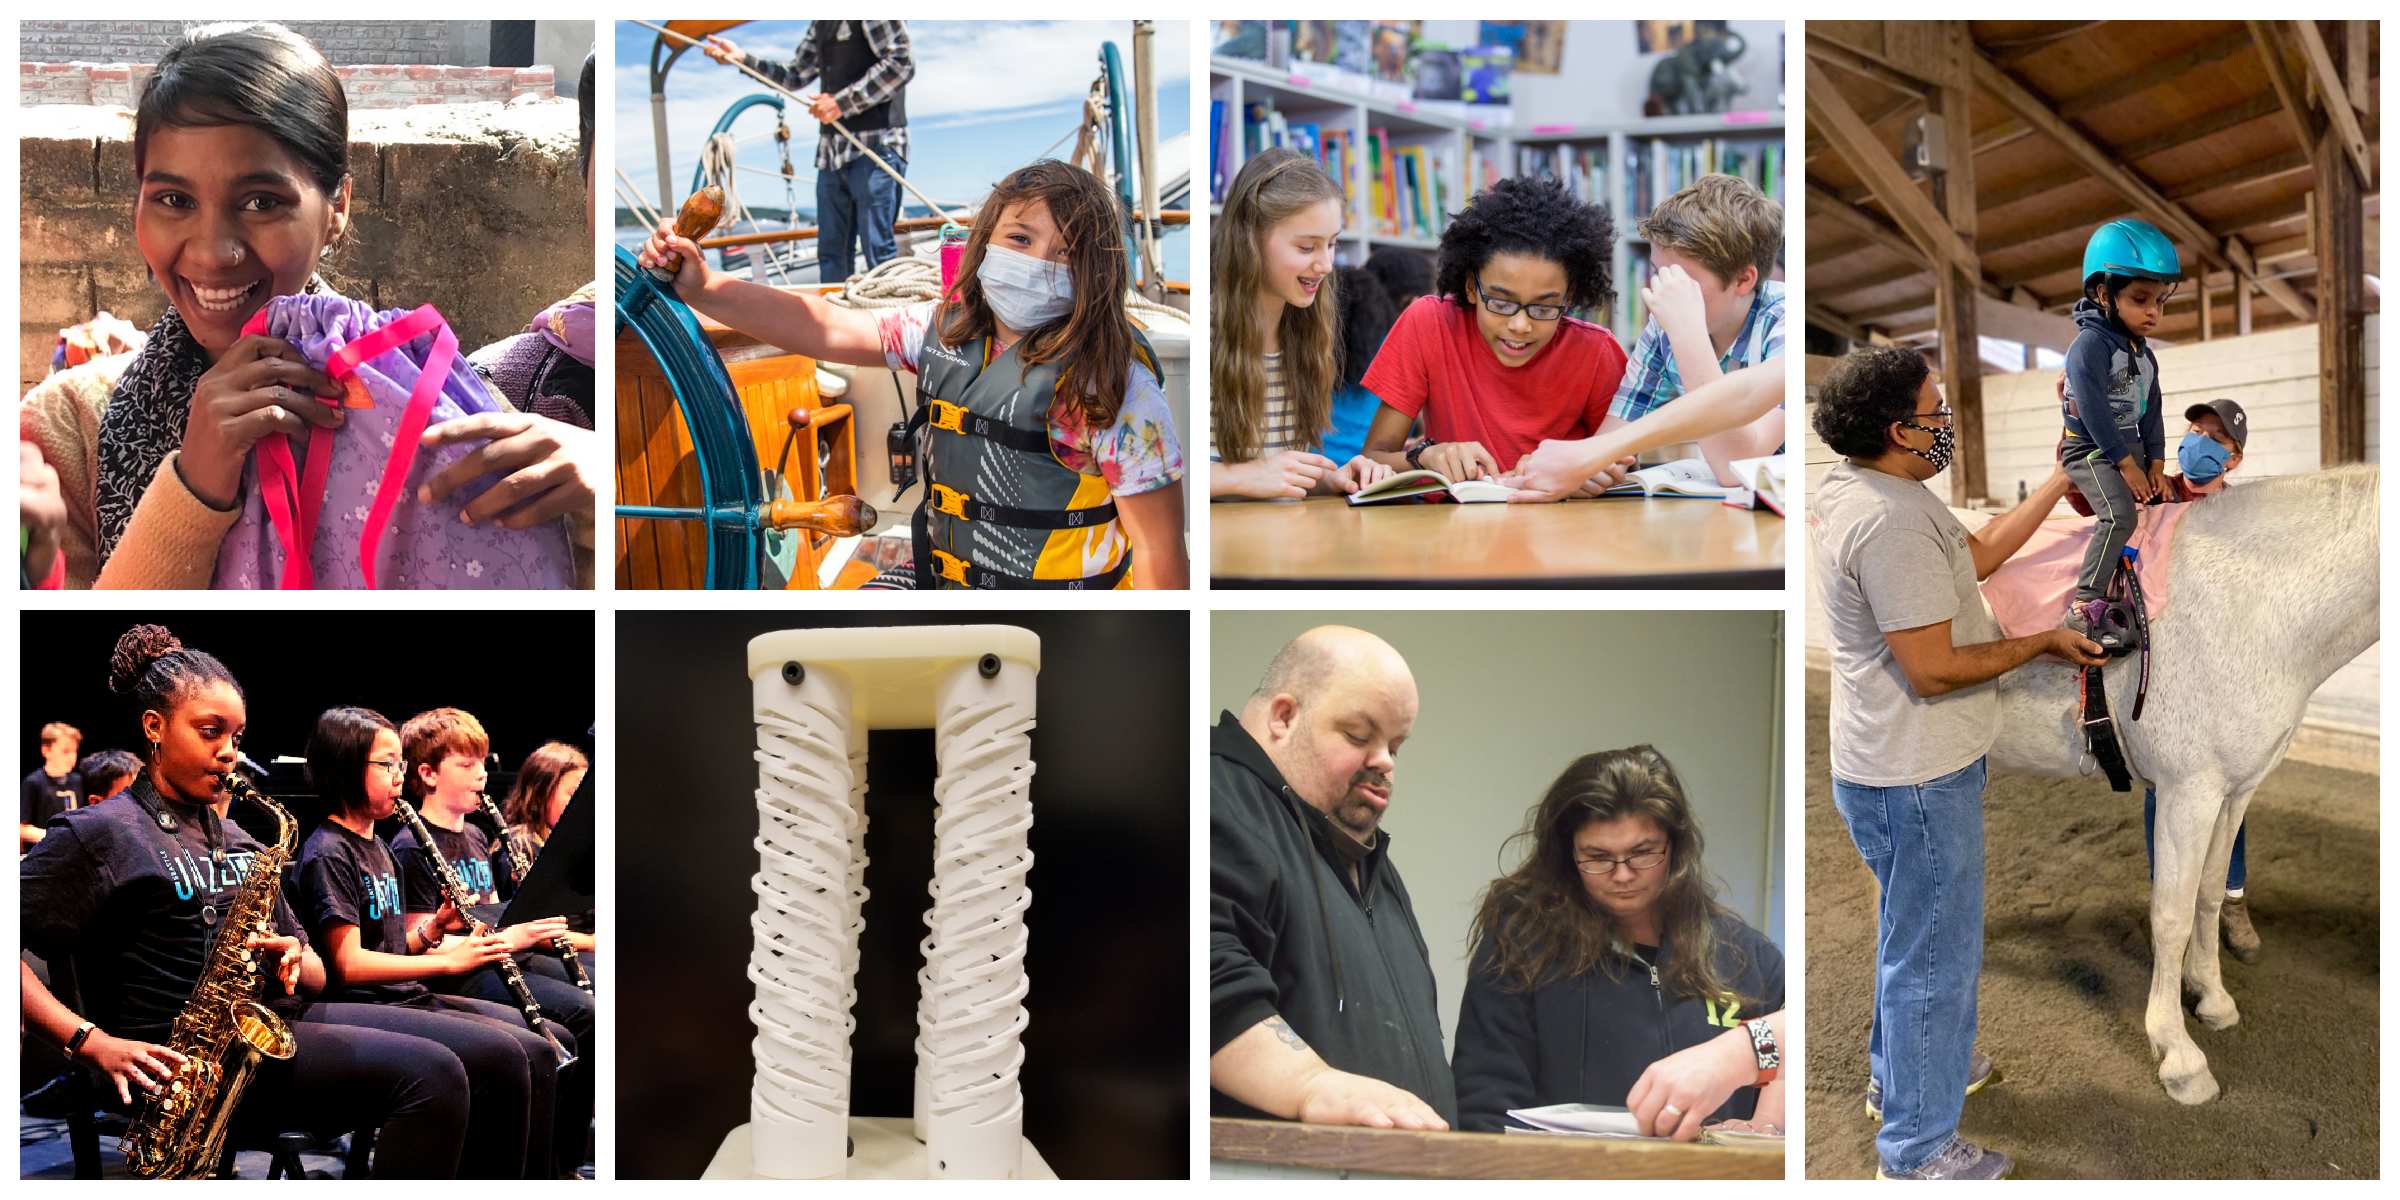 Image 1: a woman smiles for the camera while holding a hand-sewn item. Image 2: A group of children playing instruments. Image 3: A child wearing a life vest sitting inside a boat. Image 4: A piece of Photonic Sensing Equipment. Image 5: Three students read a book together with bookshelves behind them. Image 6: A man and a woman look at a piece of paper together. Image 7: A young child wearing a helmet sitting on a horse, with two adults assisting. 